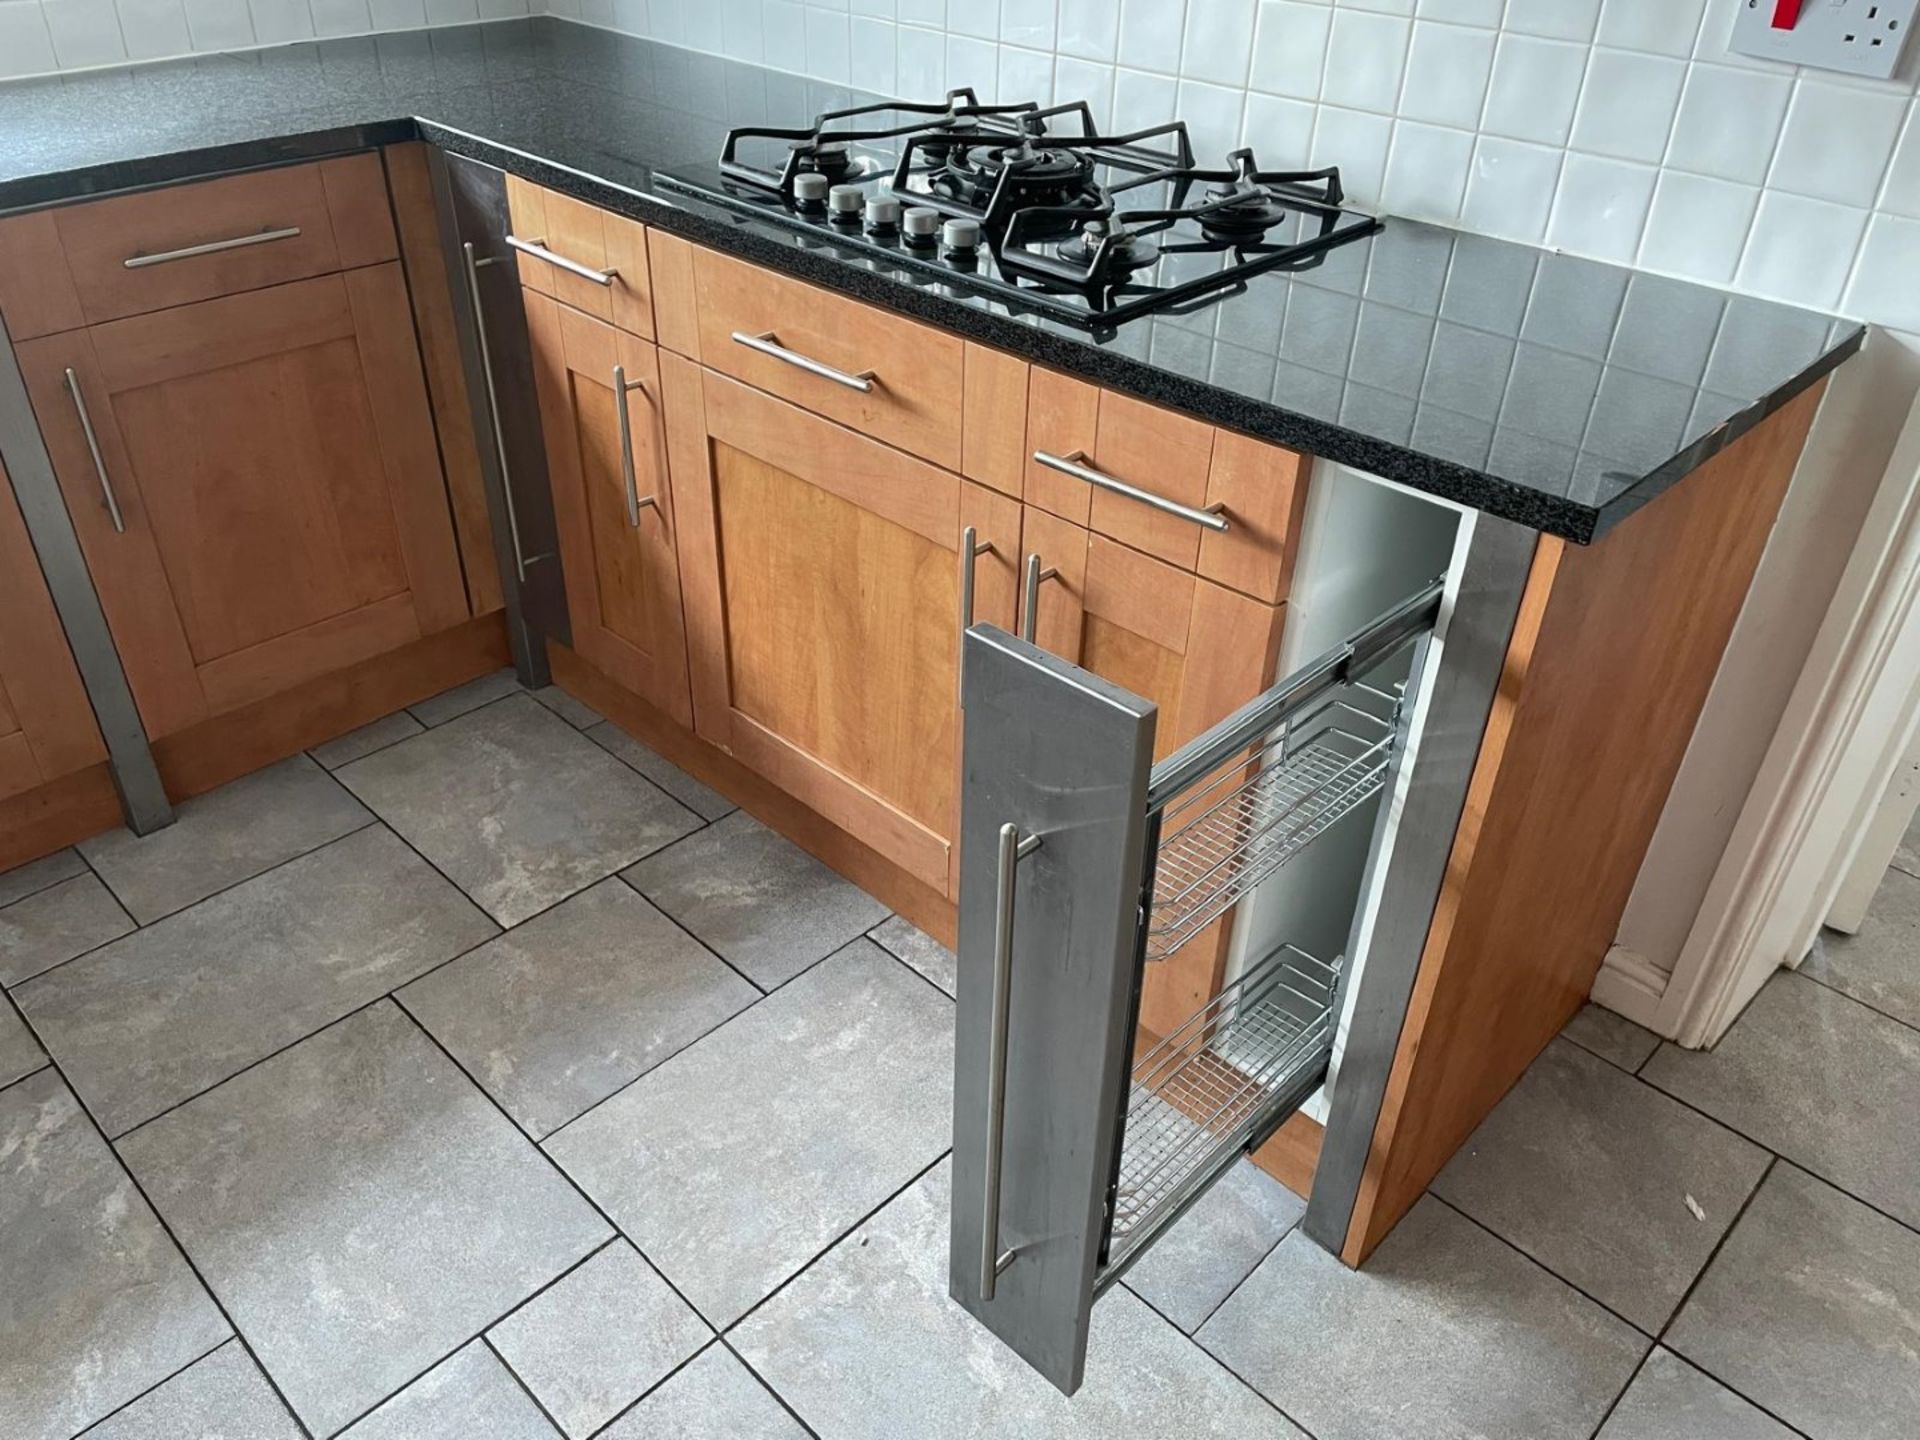 1 x Shaker-style, Feature-rich Fitted Kitchen with Solid Wood Doors, Granite Worktops and Appliances - Image 68 of 111